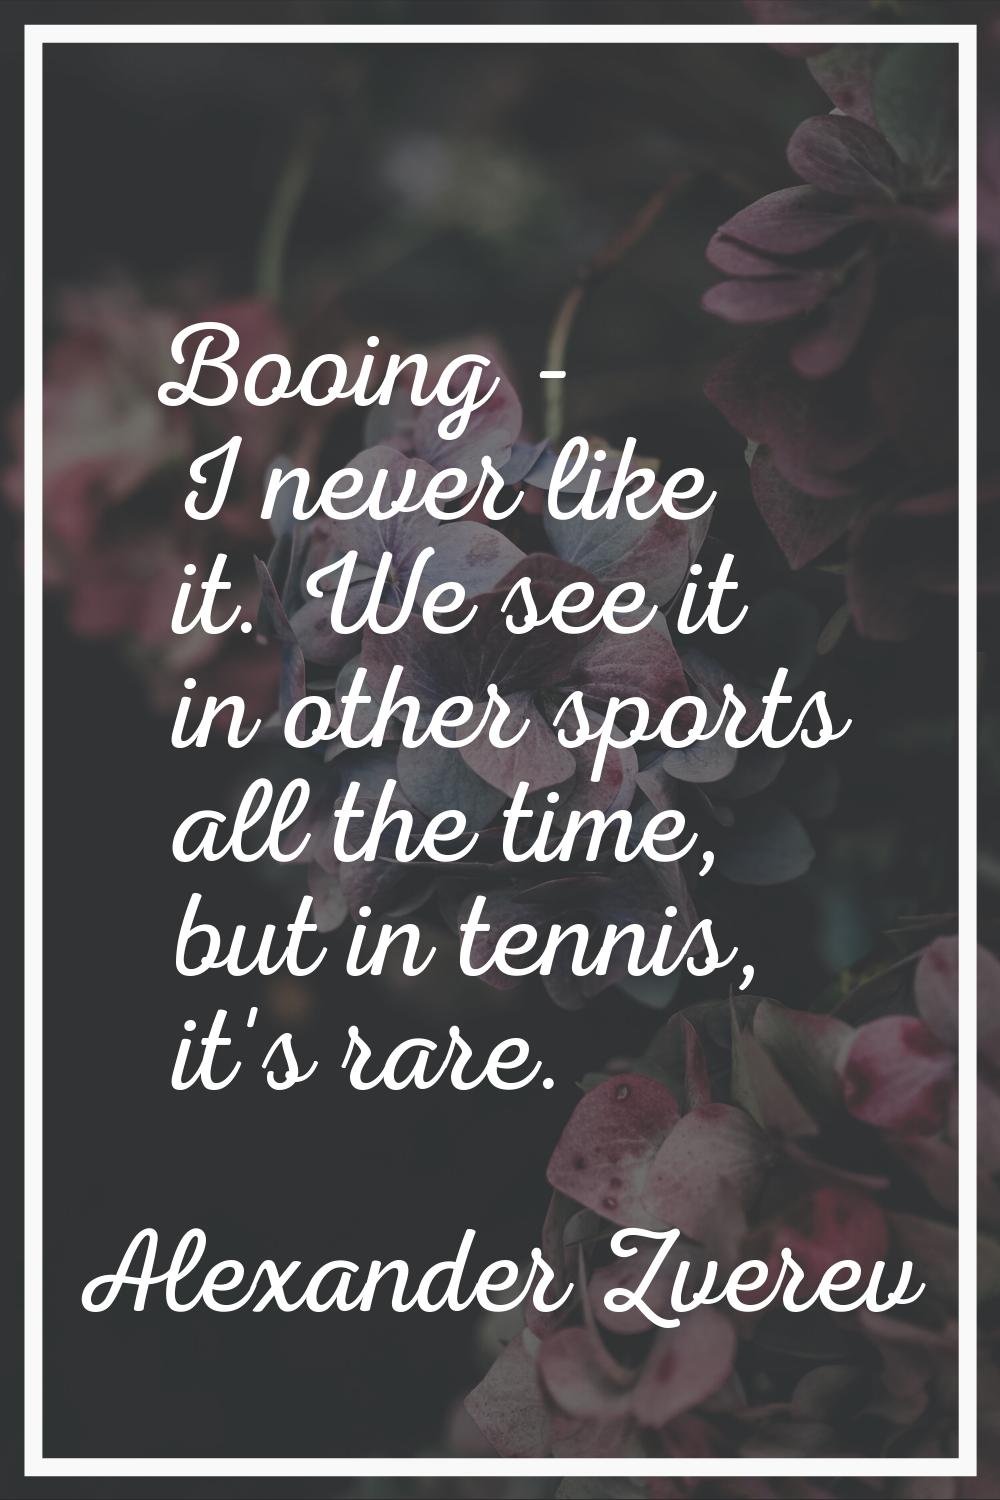 Booing - I never like it. We see it in other sports all the time, but in tennis, it's rare.